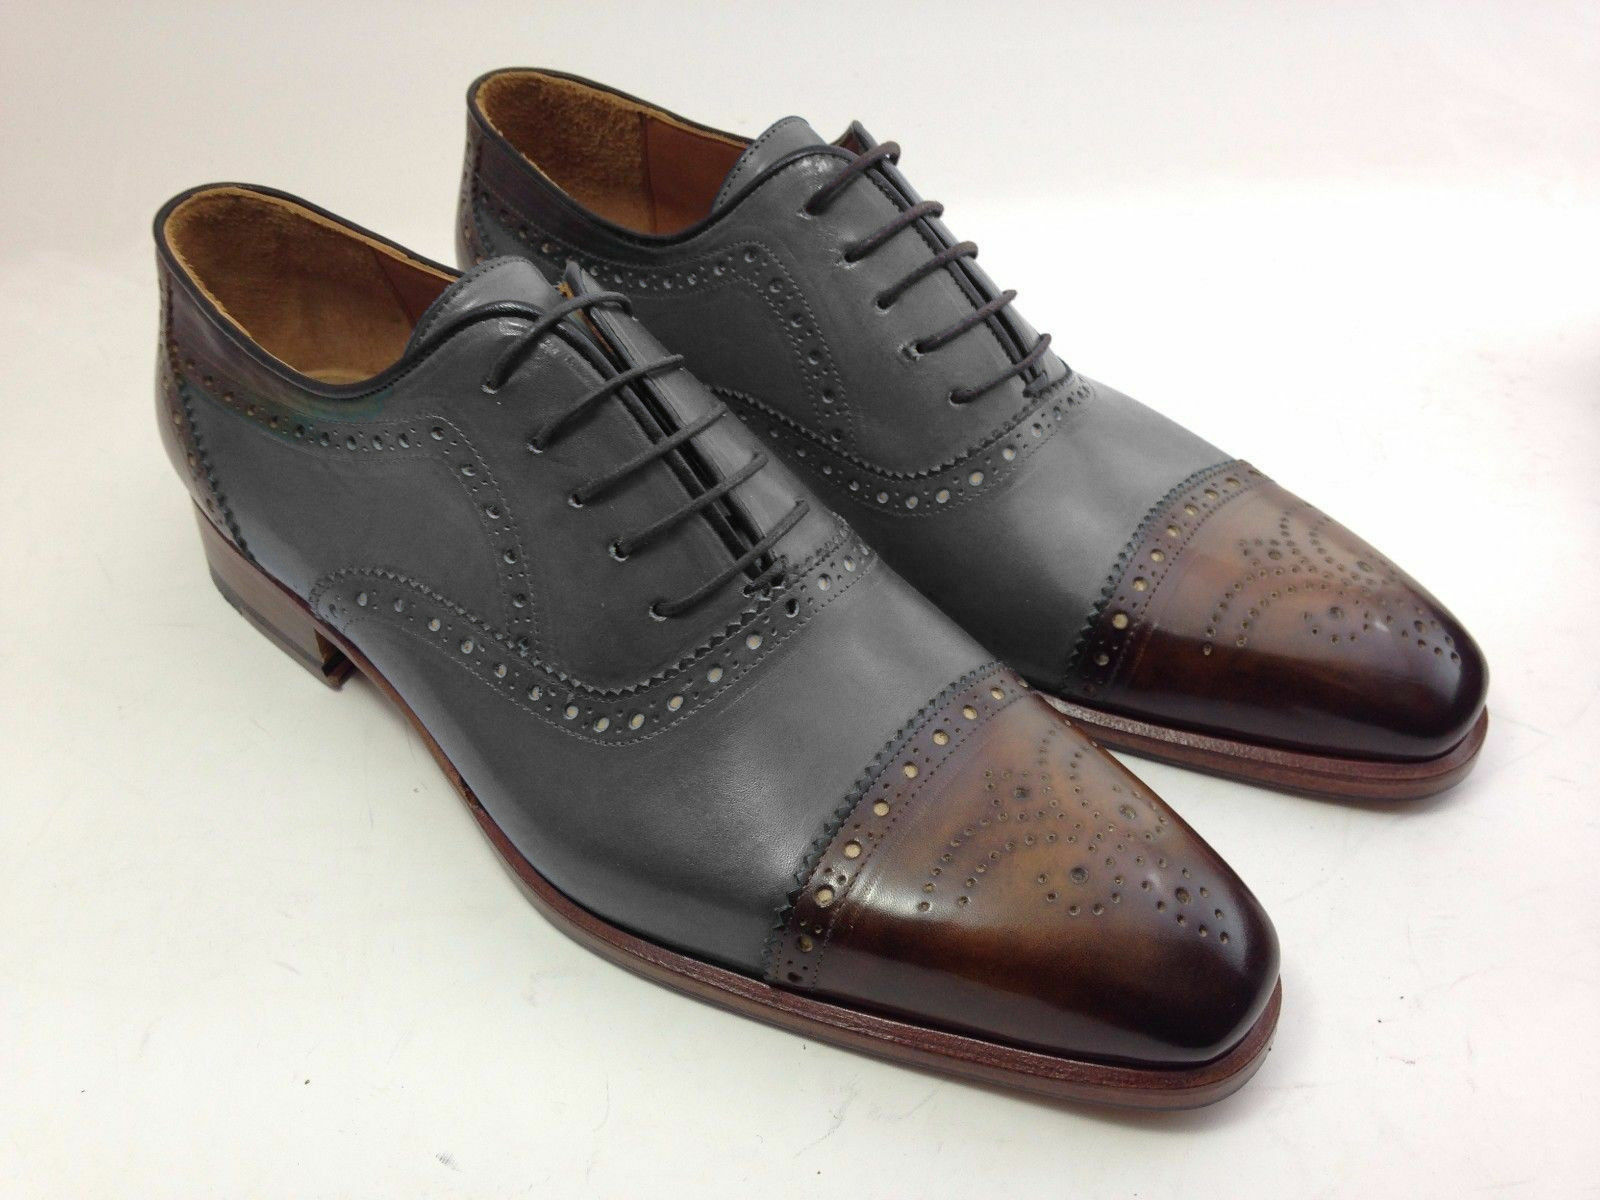 Oxford Two Tone Brown Black Brogue Cap Toe Genuine Leather Lace Up Shoes US 7-16